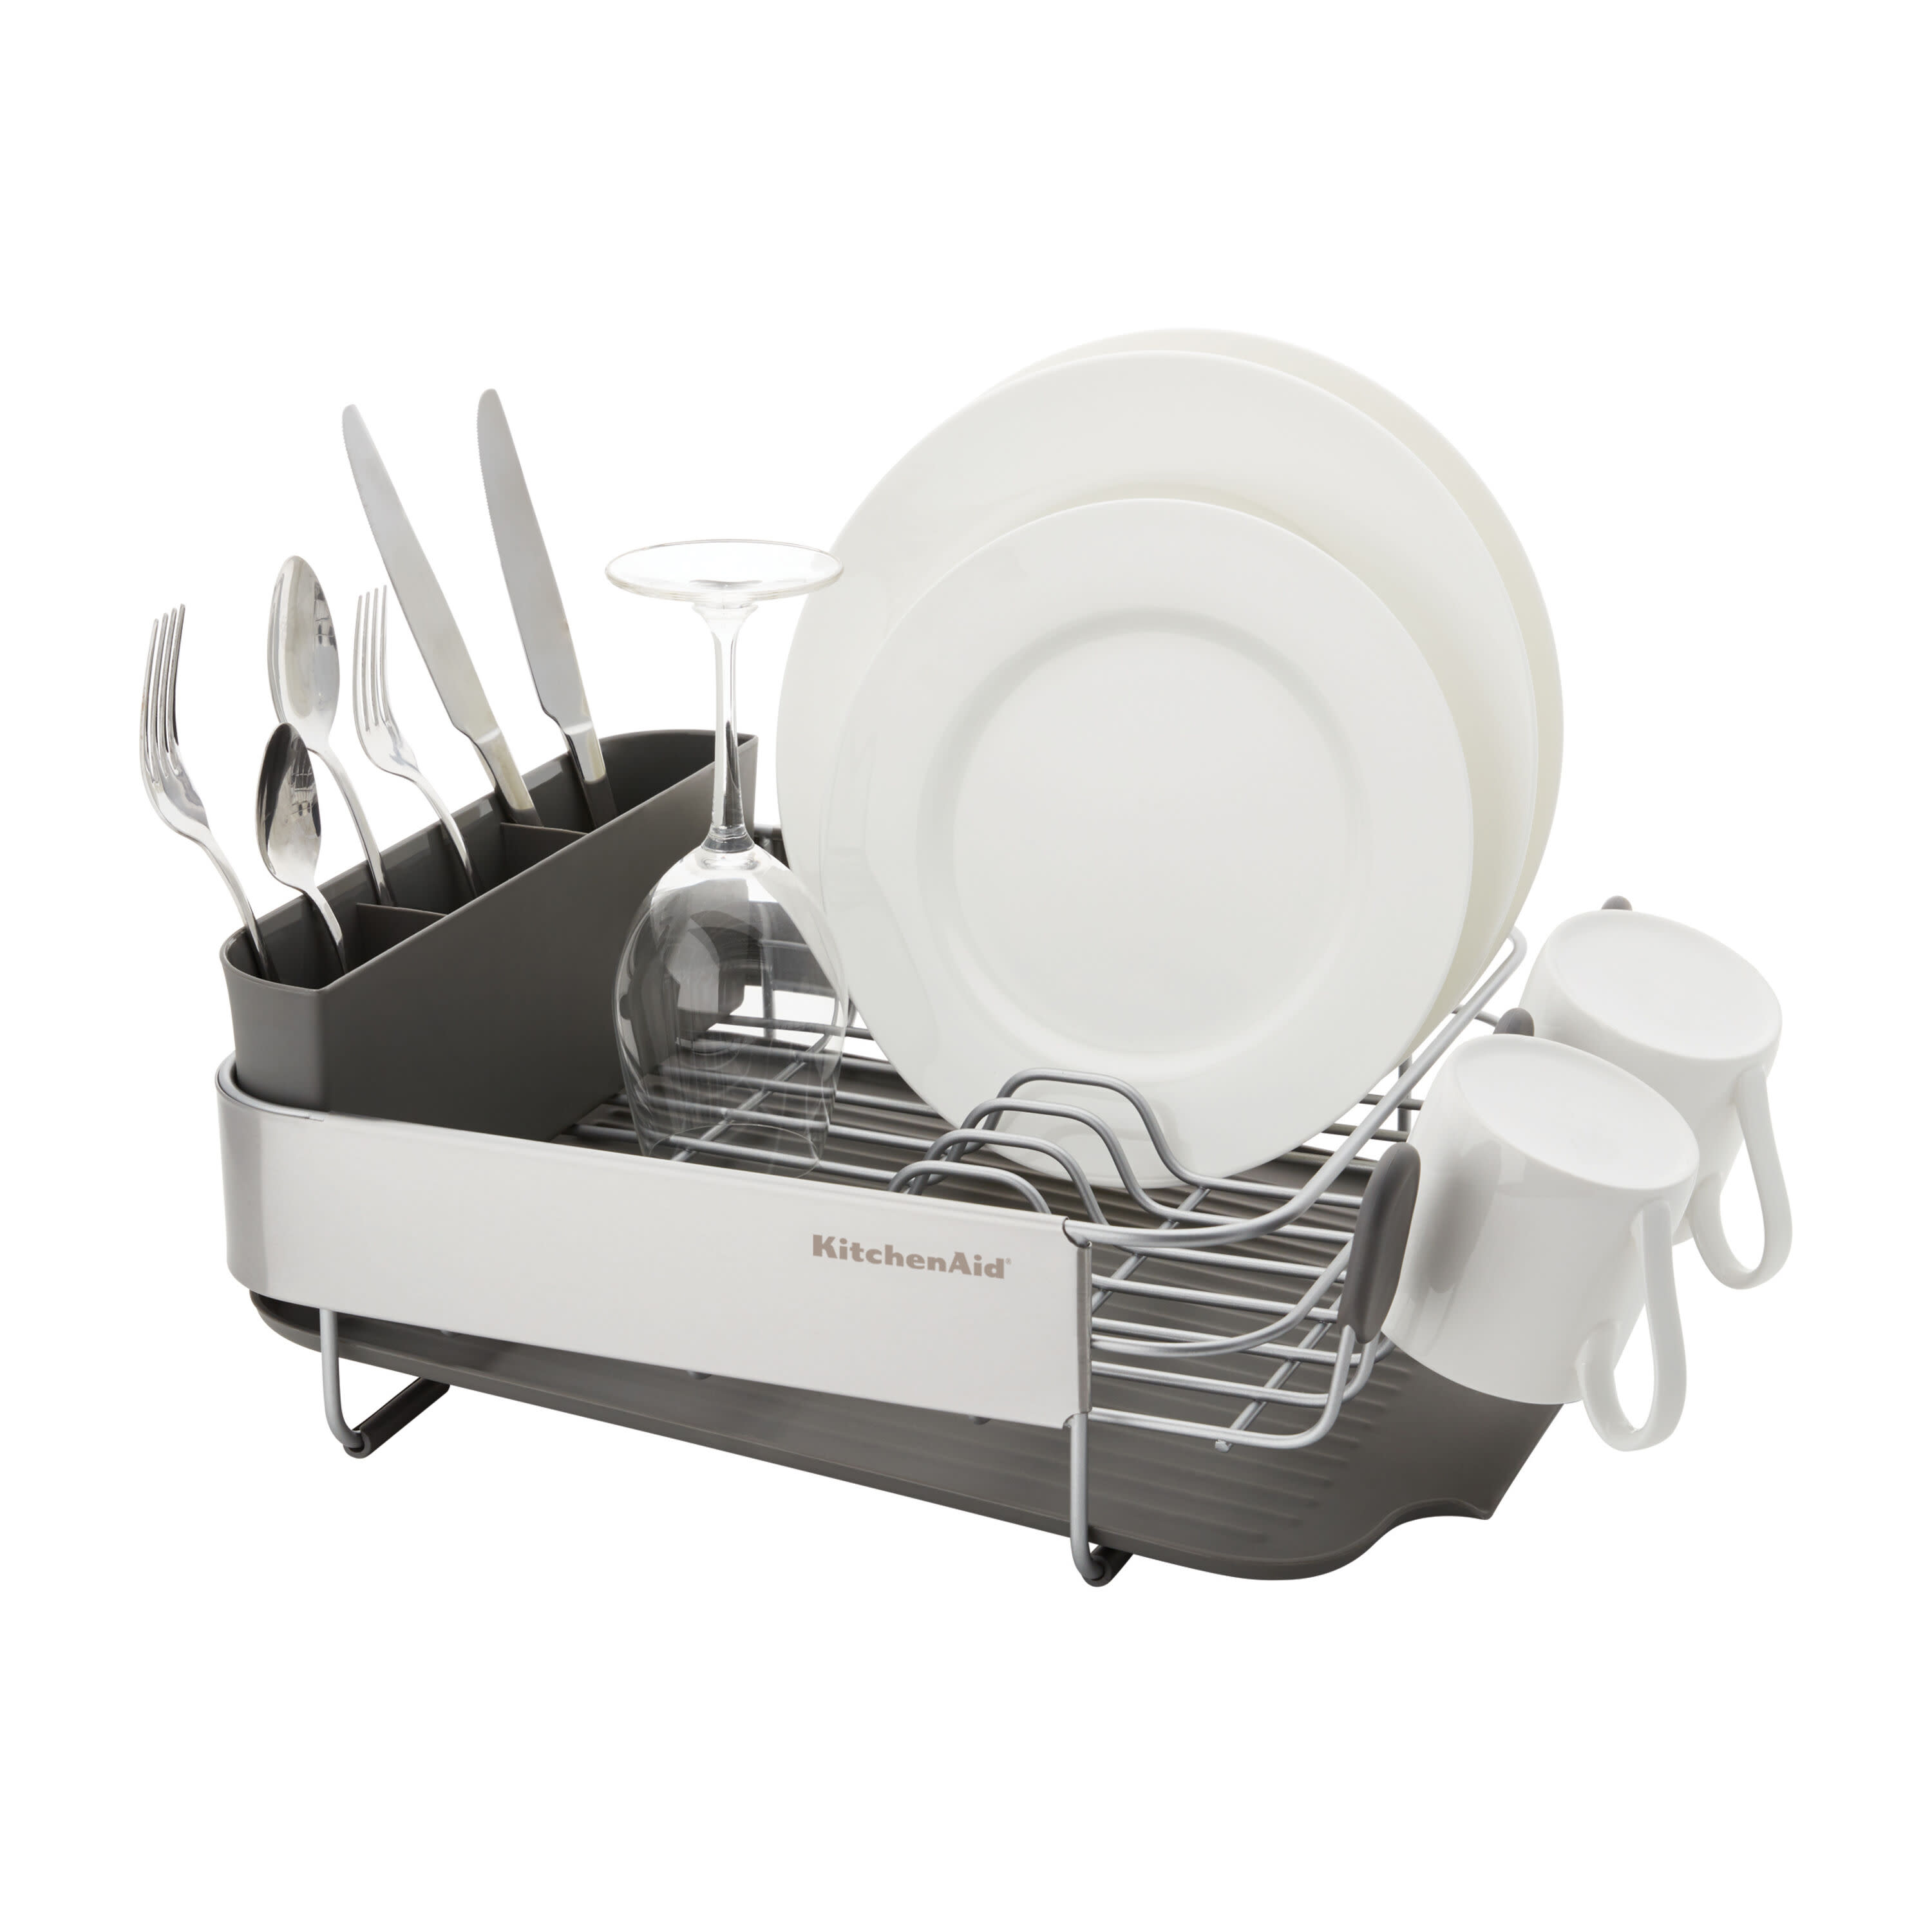 Kitchenaid Stainless Steel Wrap Compact Dish Rack in Satin Gray - image 6 of 9